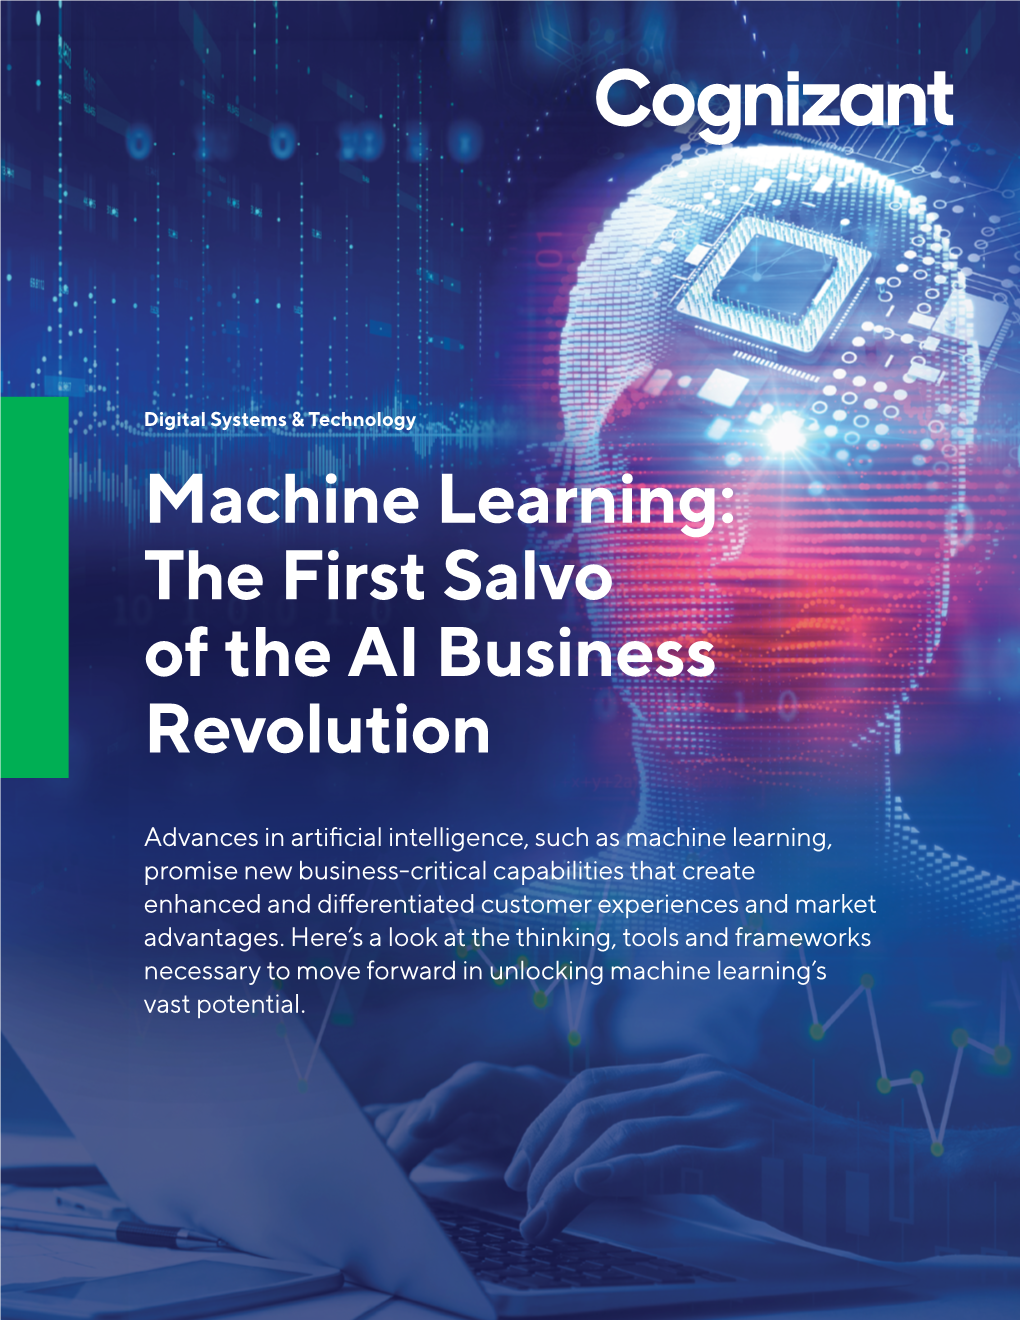 Machine Learning: the First Salvo of the AI Business Revolution